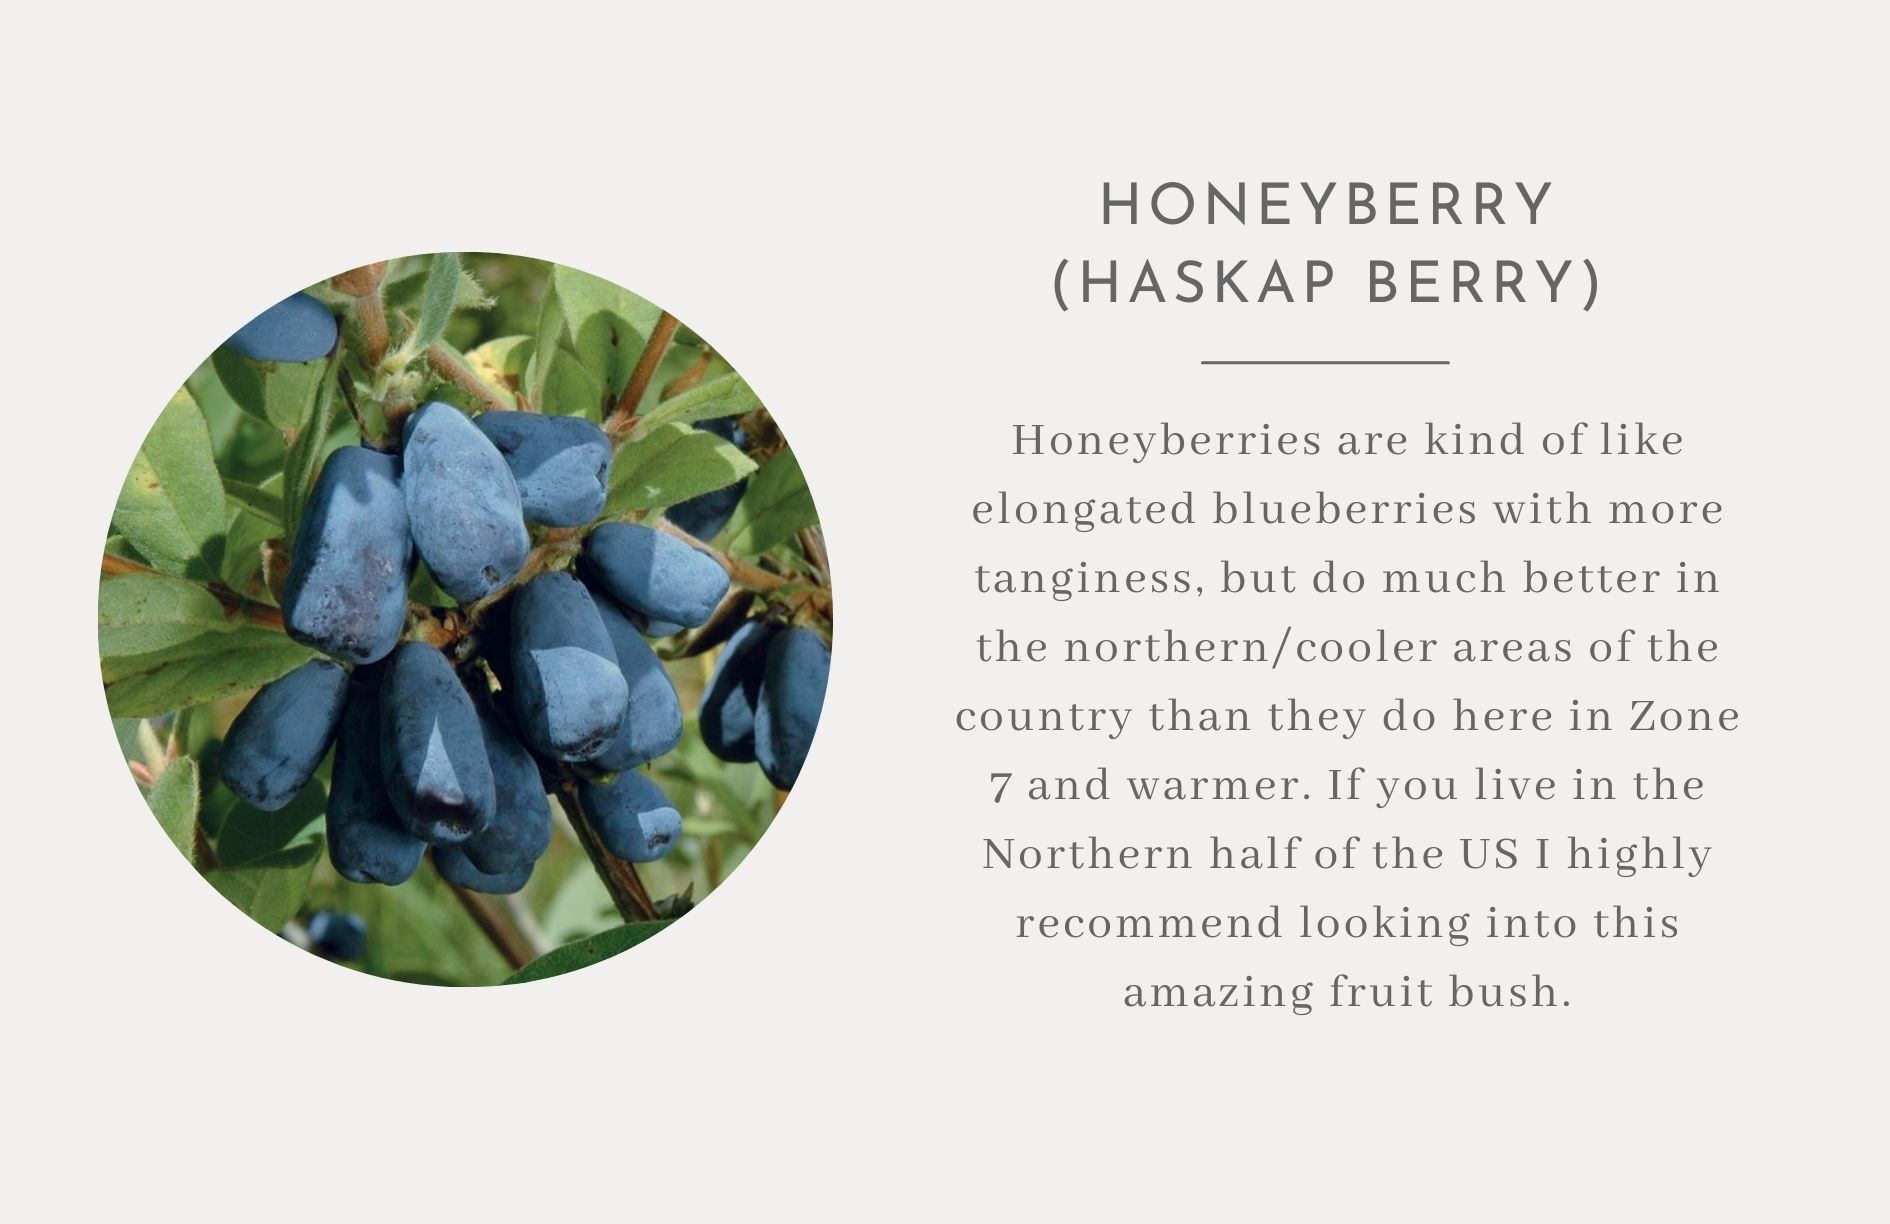 Honeyberry Bushes - Edible trees and bushes